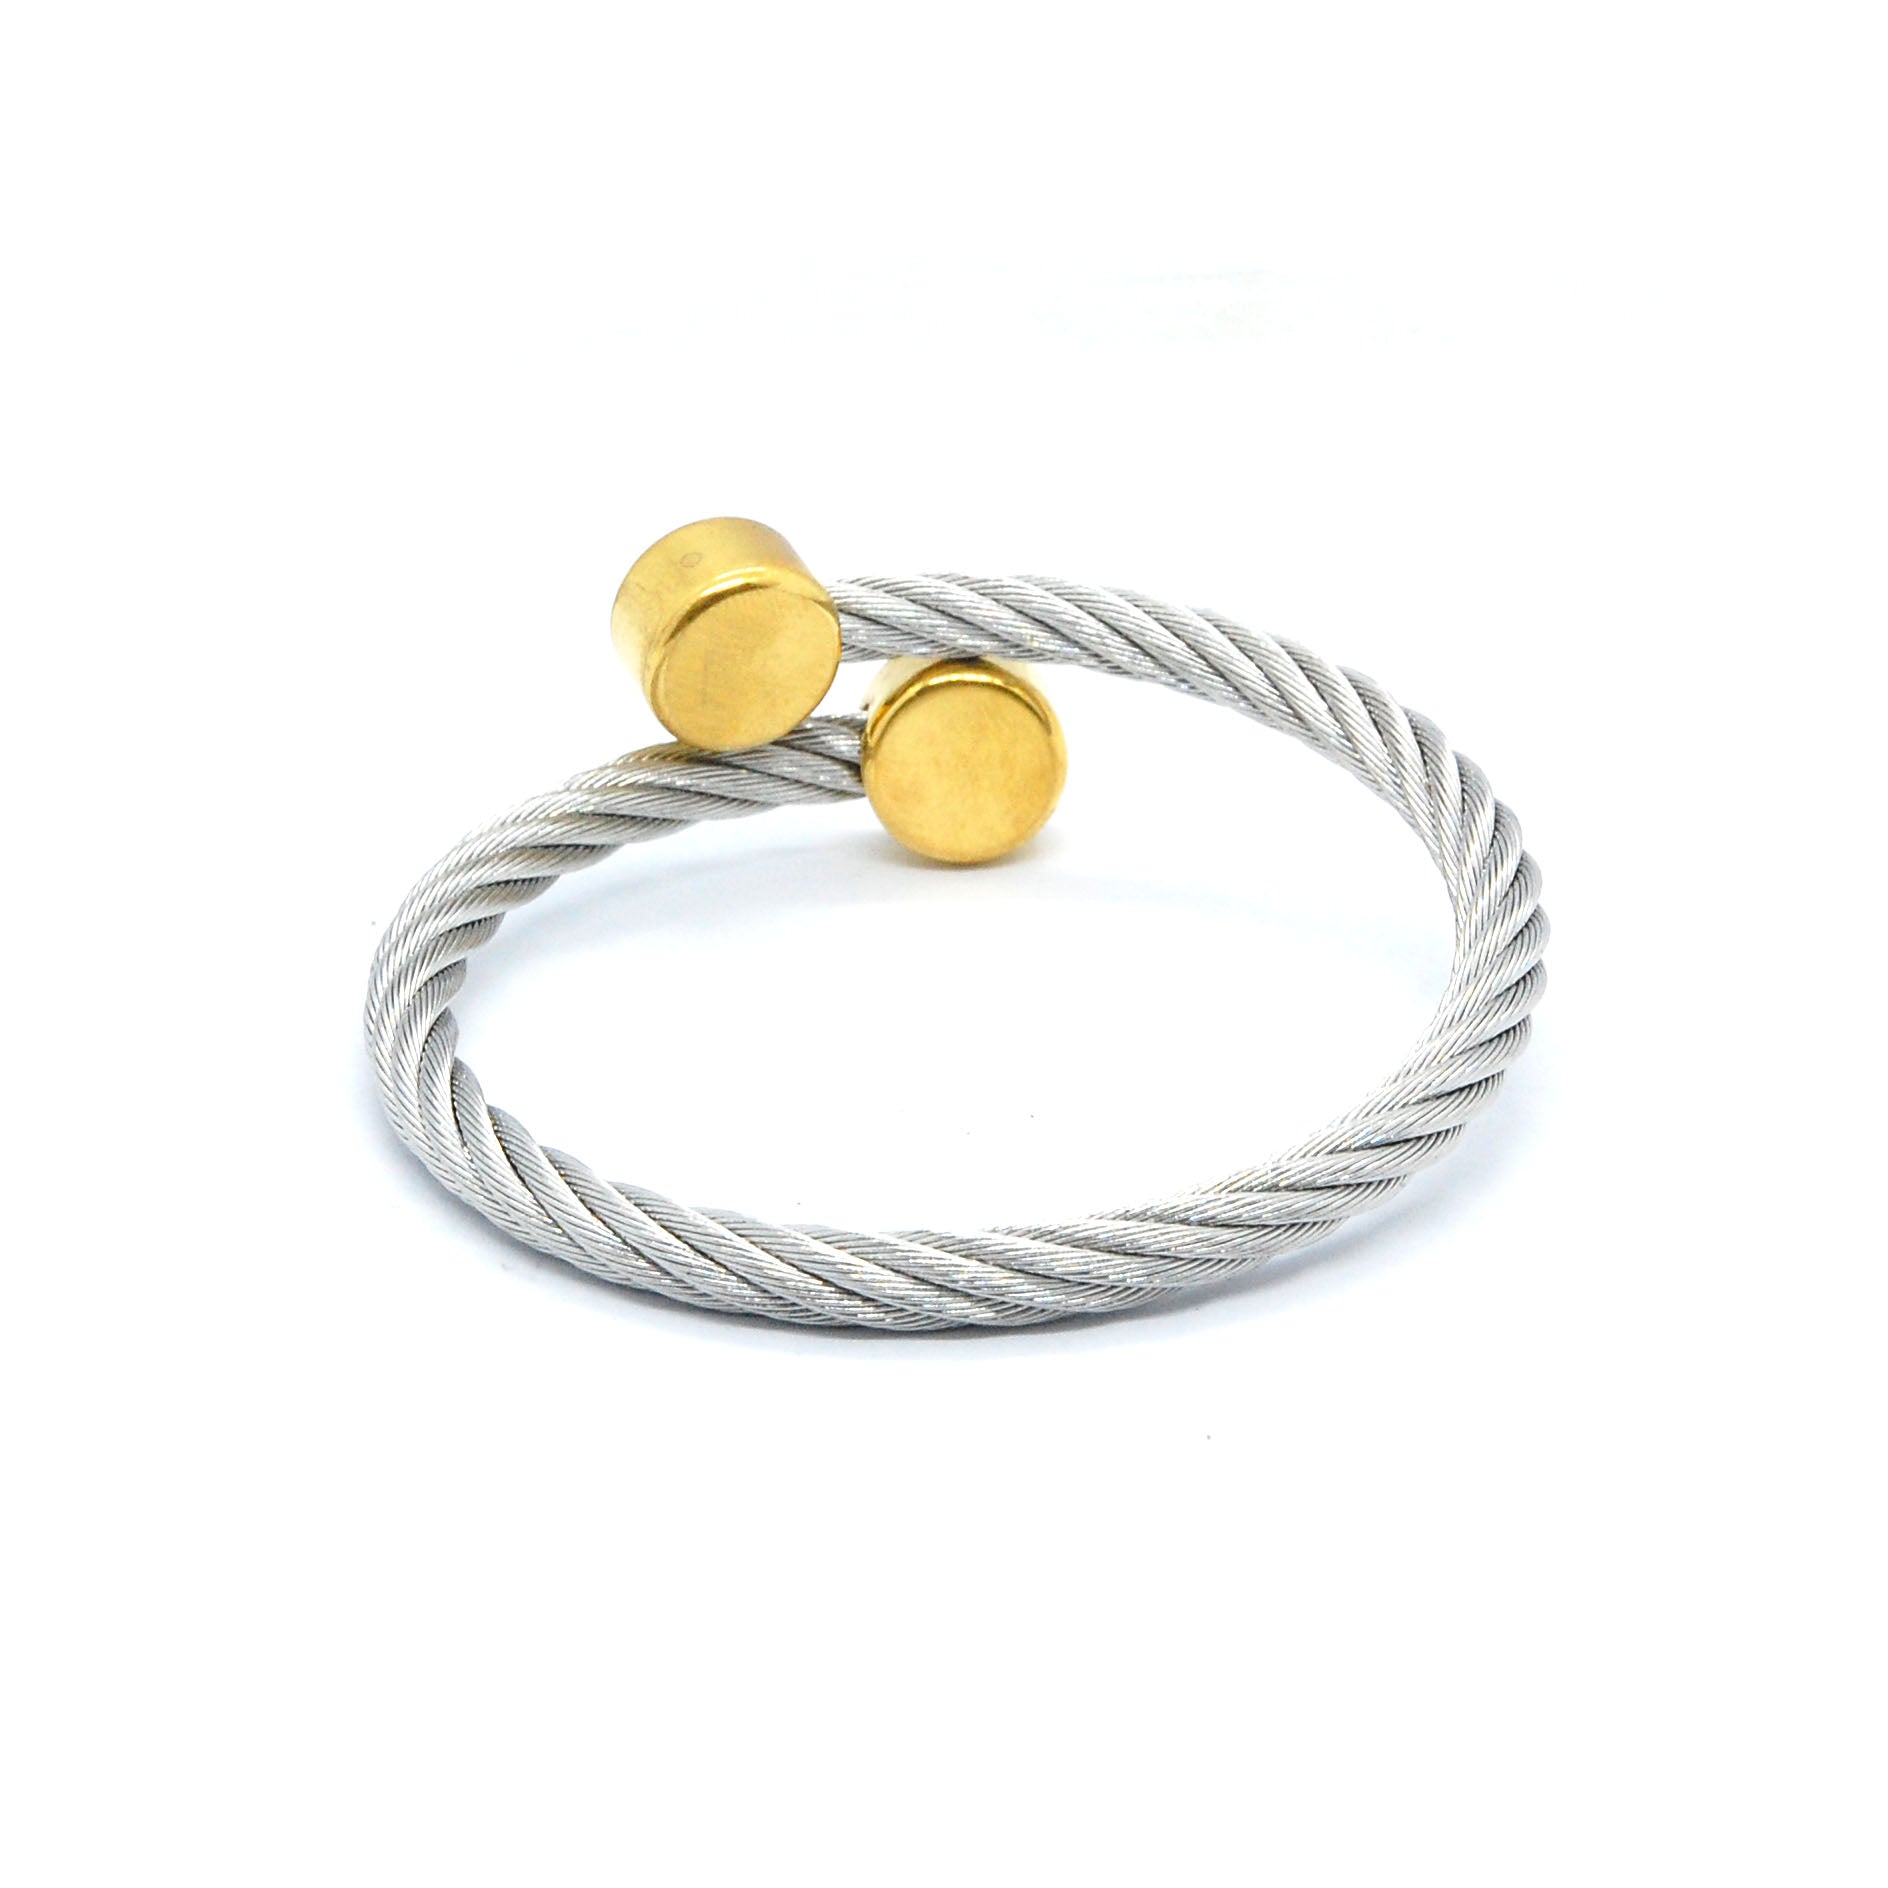 ESBG 7855: Twisted Charriol Bangle w/ Gold Plated Circle Ends